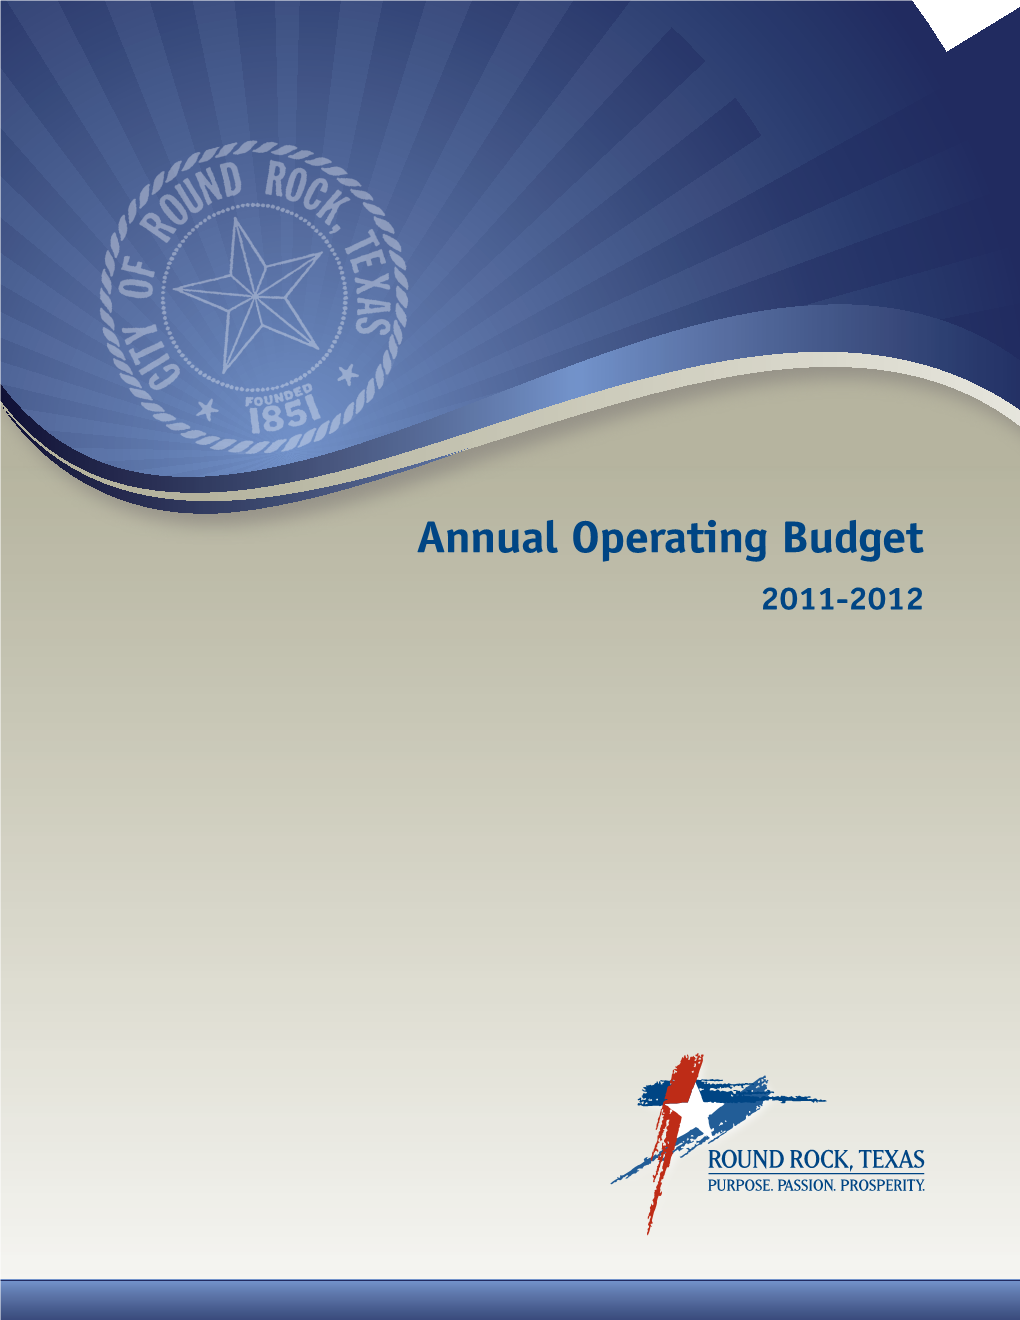 Annual Operating Budget 2011-2012 History of Round Rock